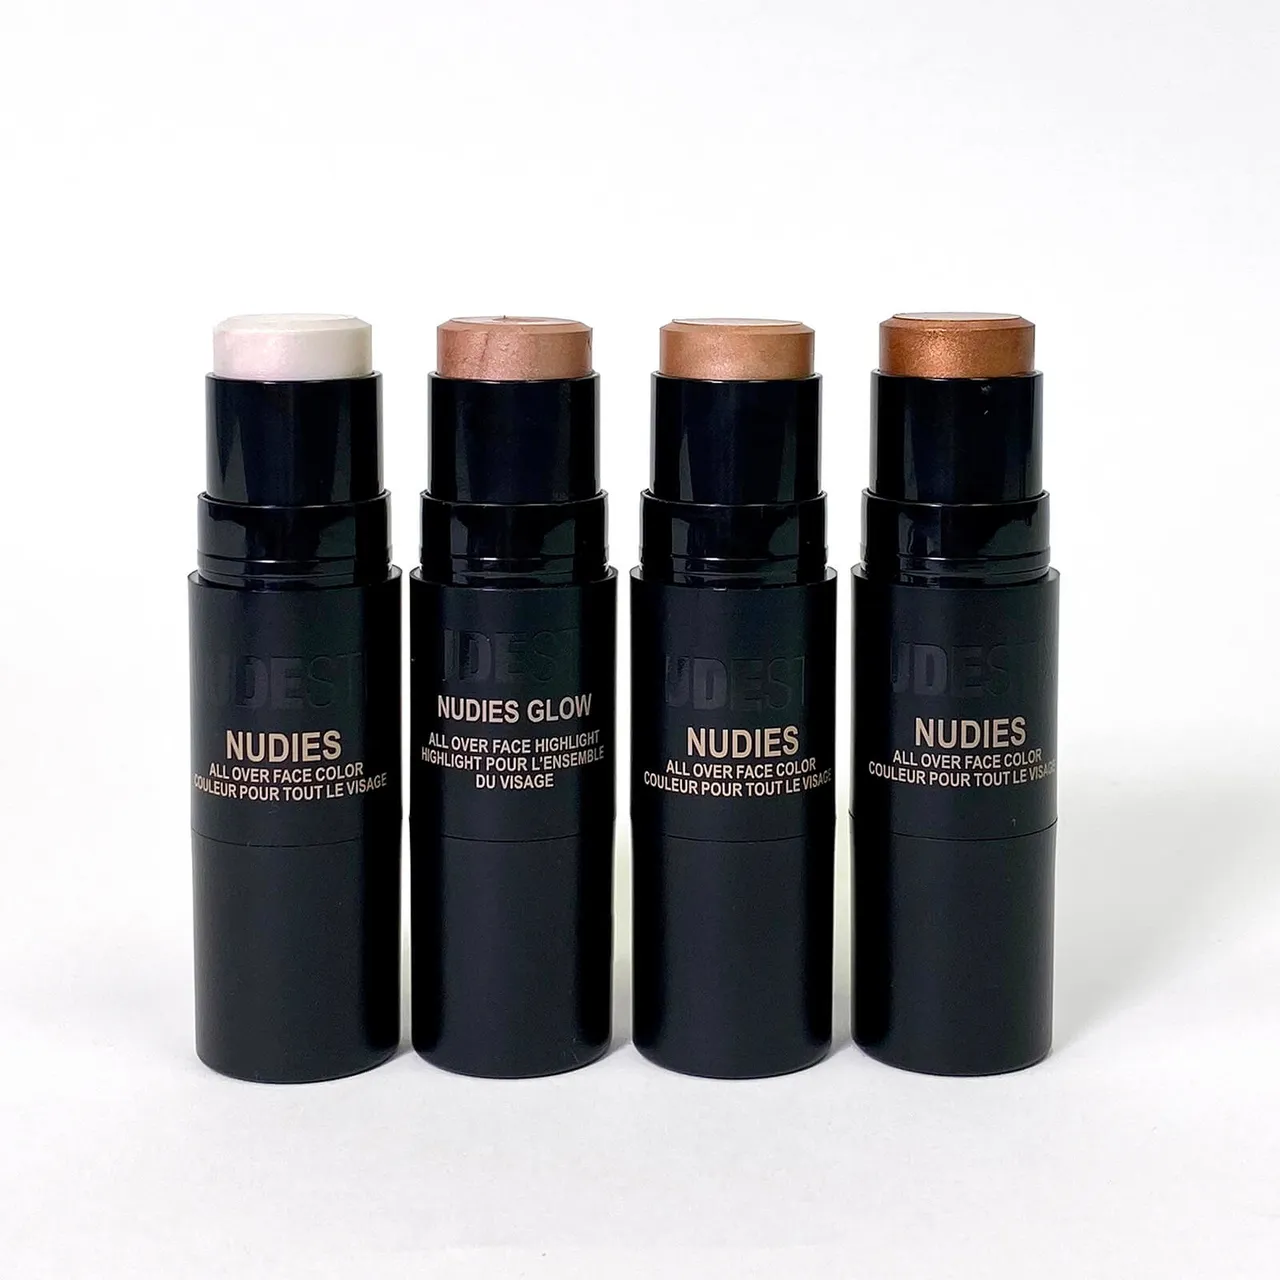 NUDESTIX Nudies Glow All Over Face Highlight Colour 8g (Various Shades) - Bubbly Bebe